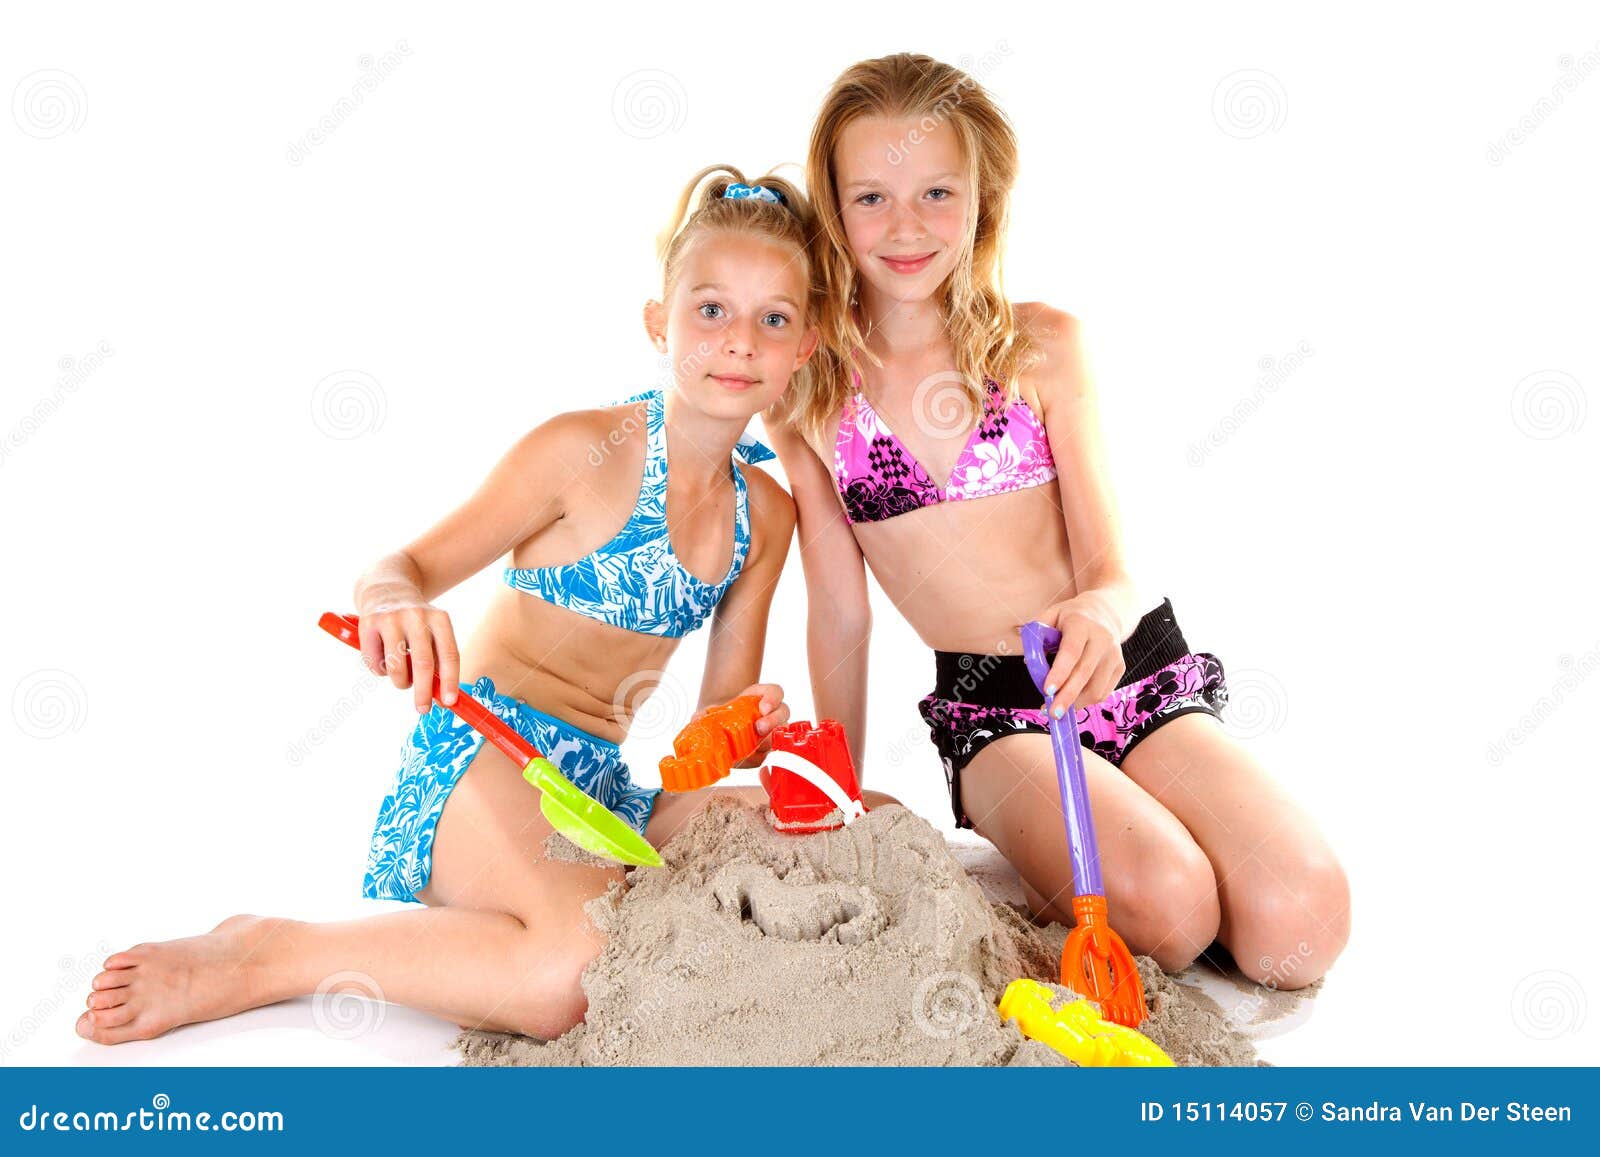 two young girls in beach wear